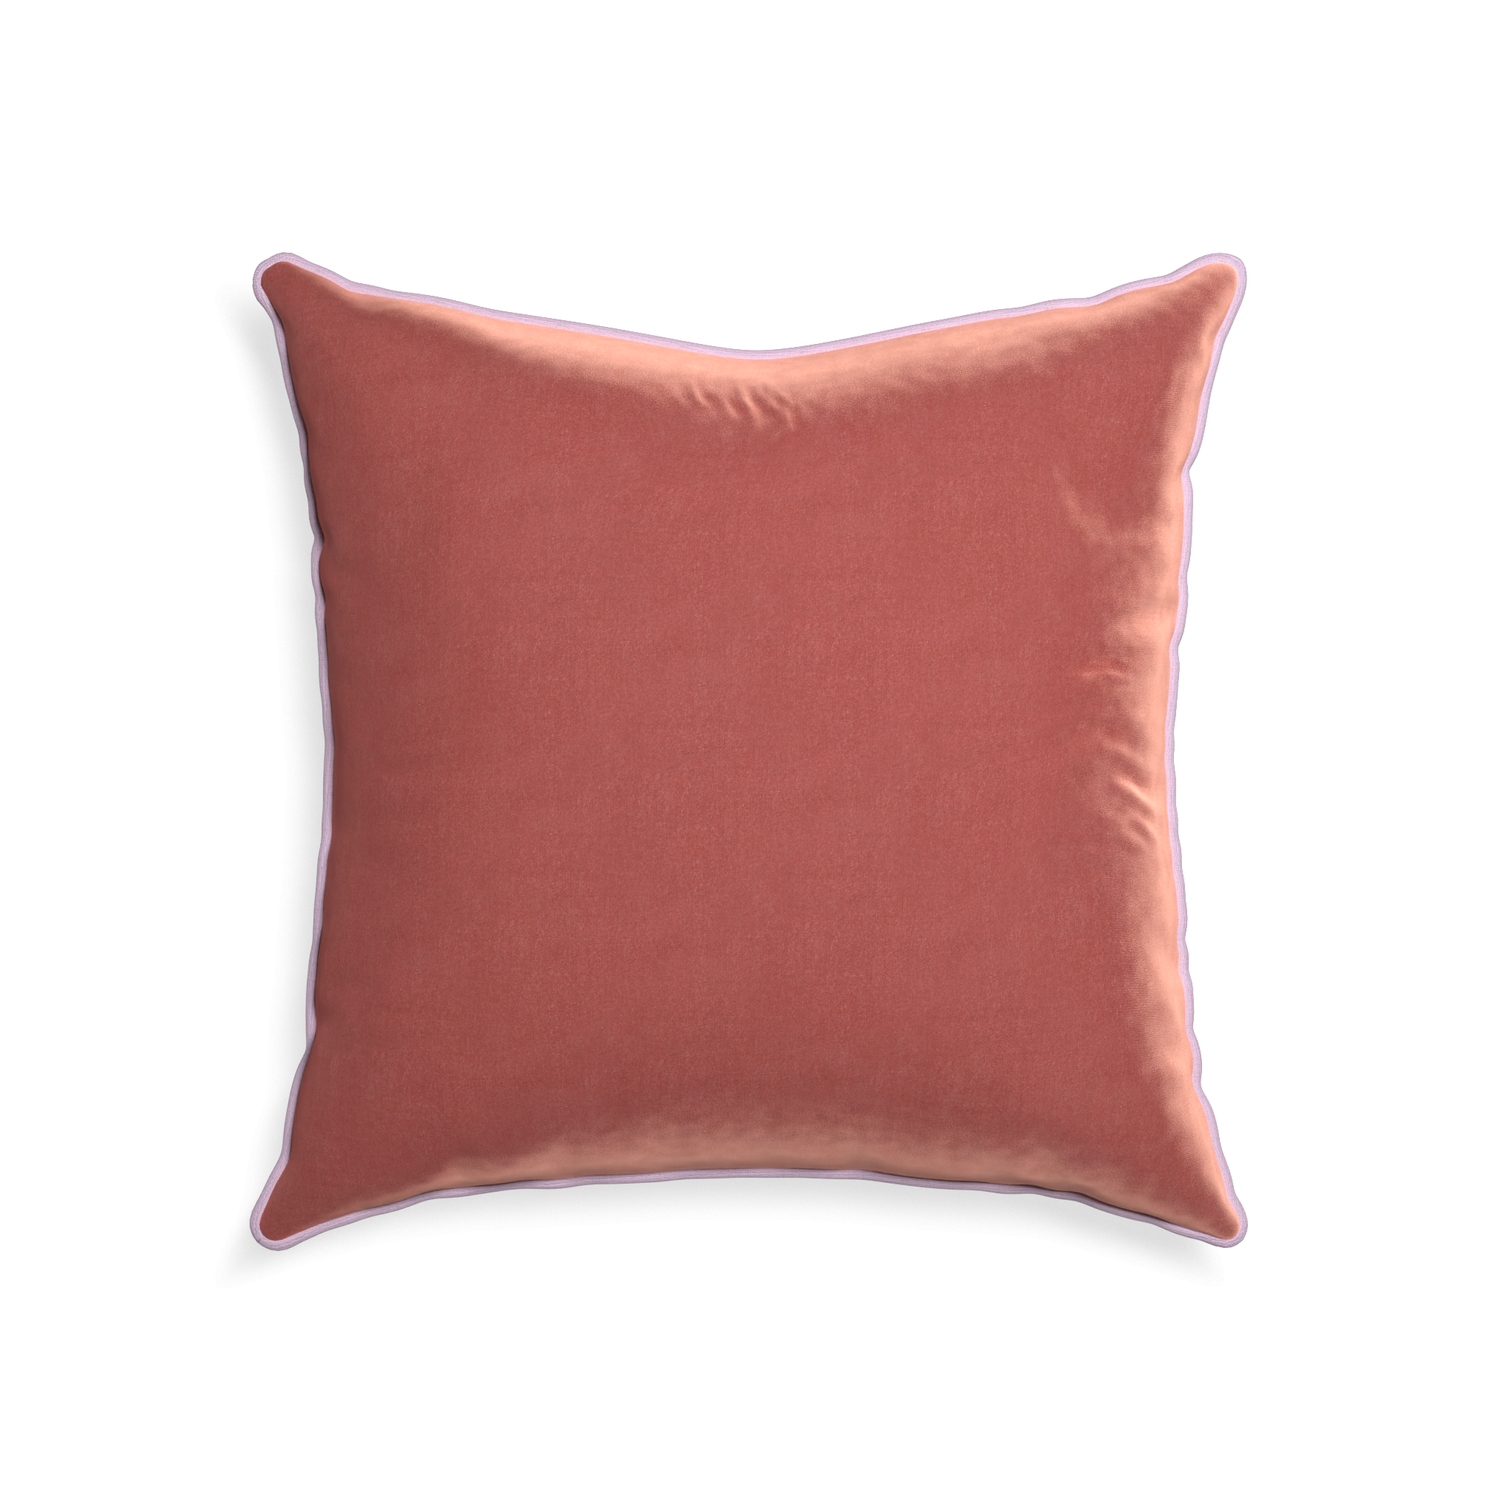 22-square cosmo velvet custom pillow with l piping on white background